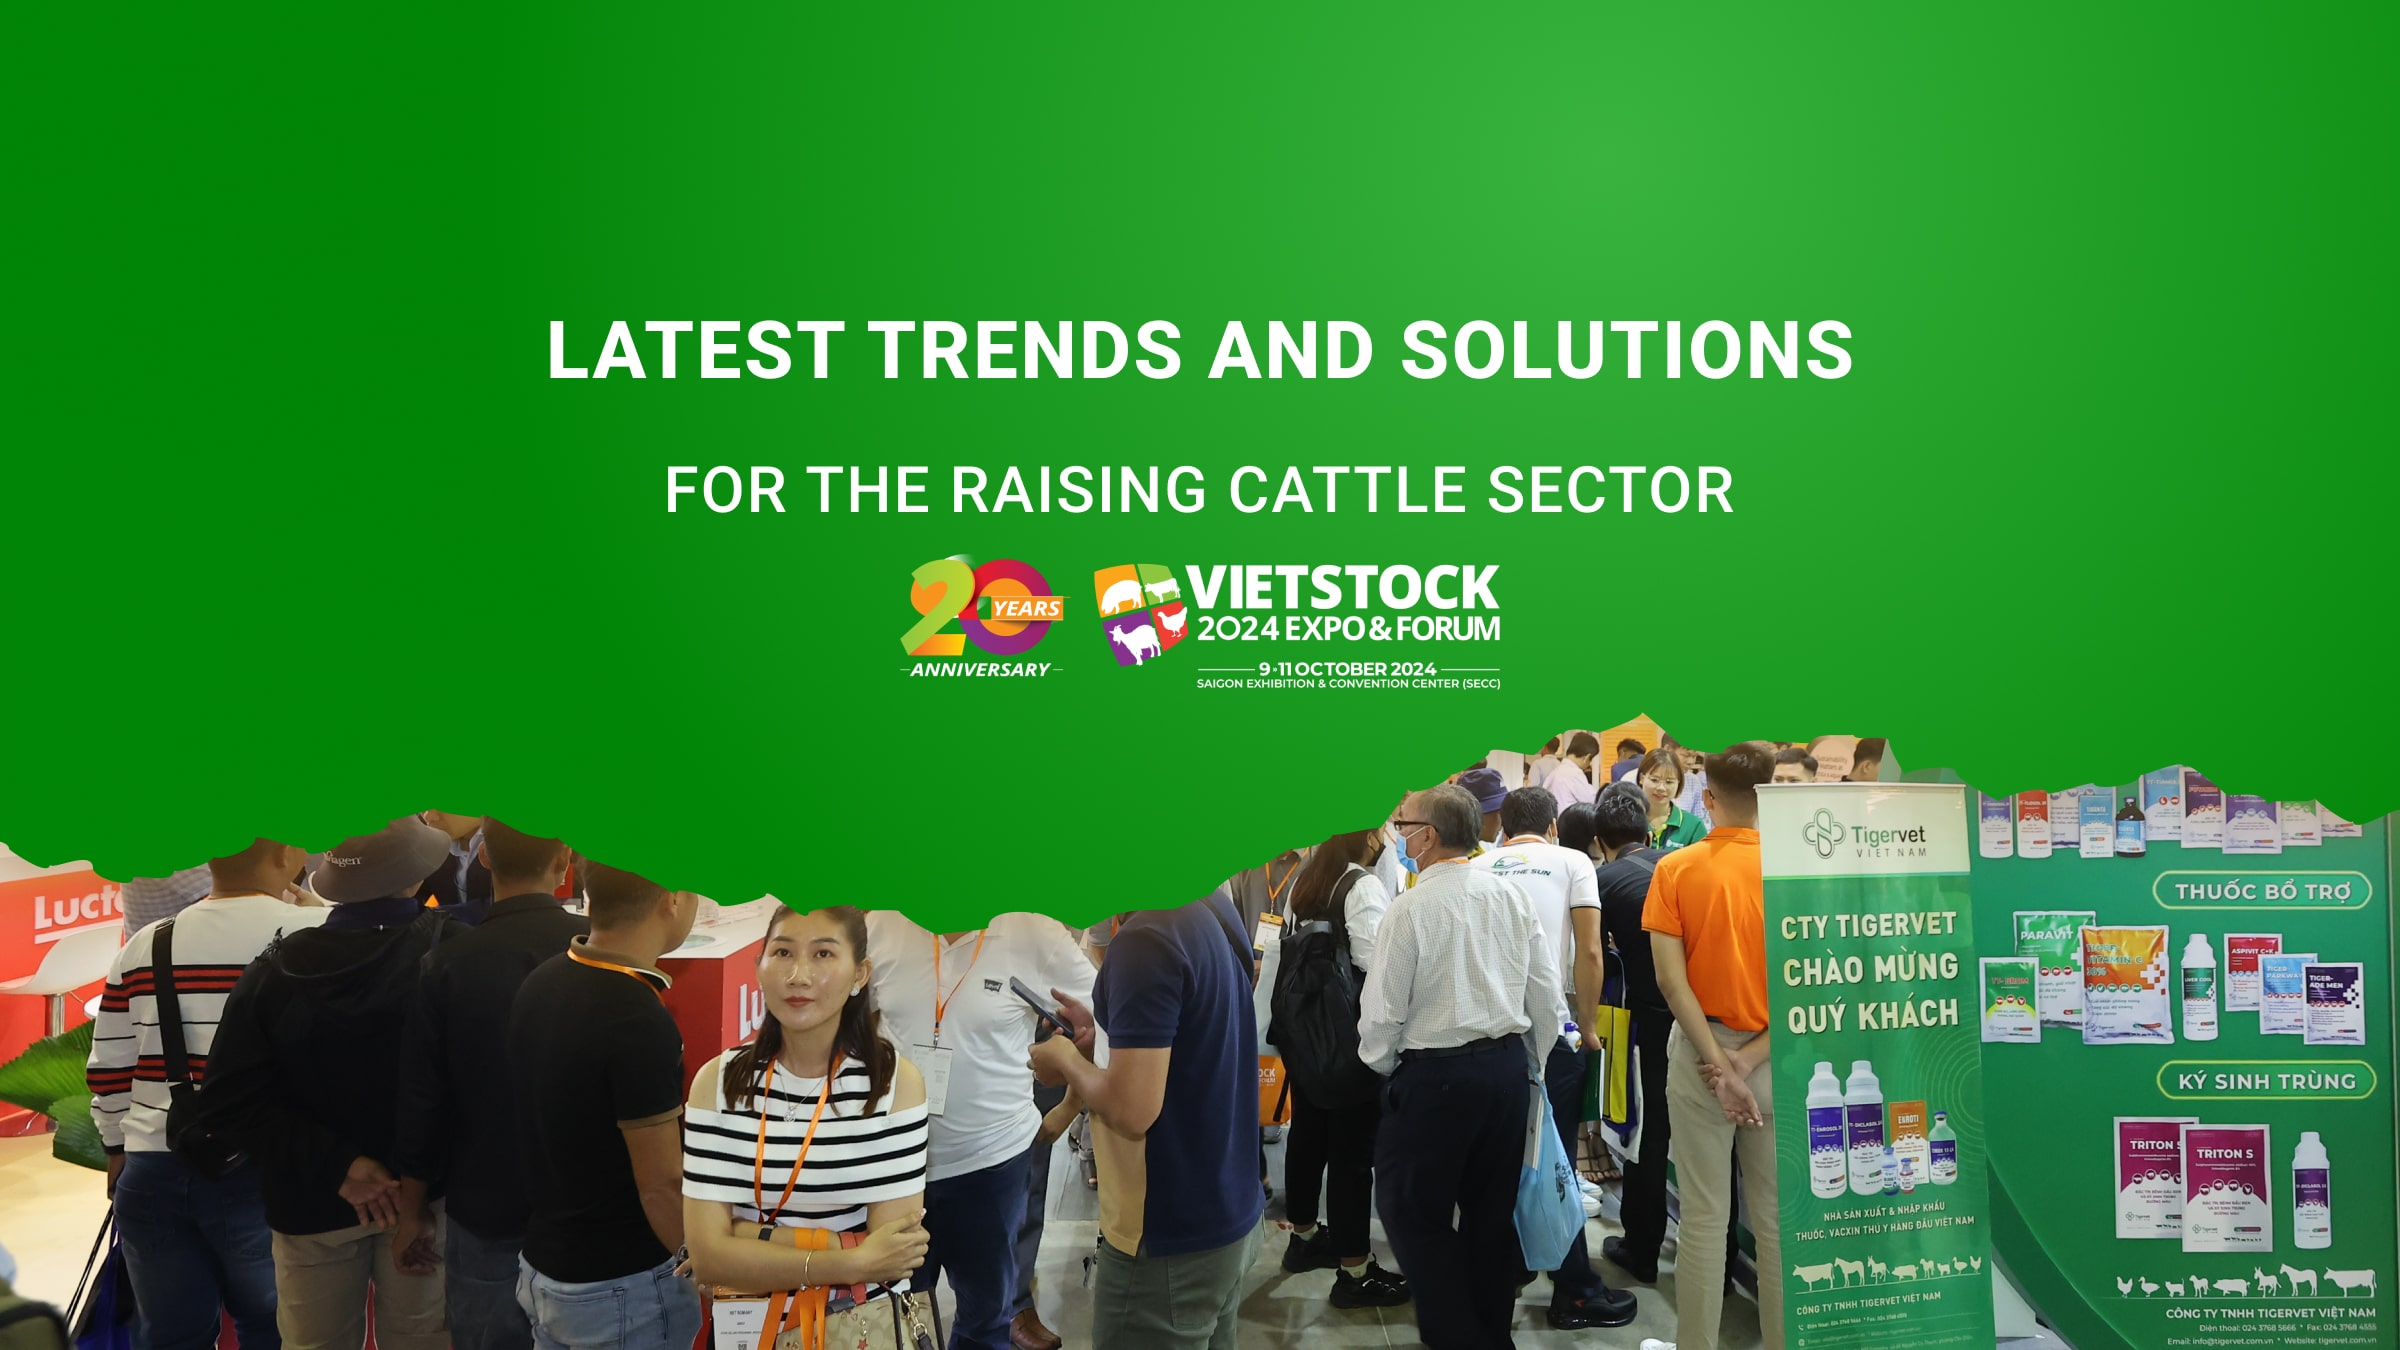 LATEST TRENDS AND SOLUTIONS FOR THE RAISING CATTLE SECTOR